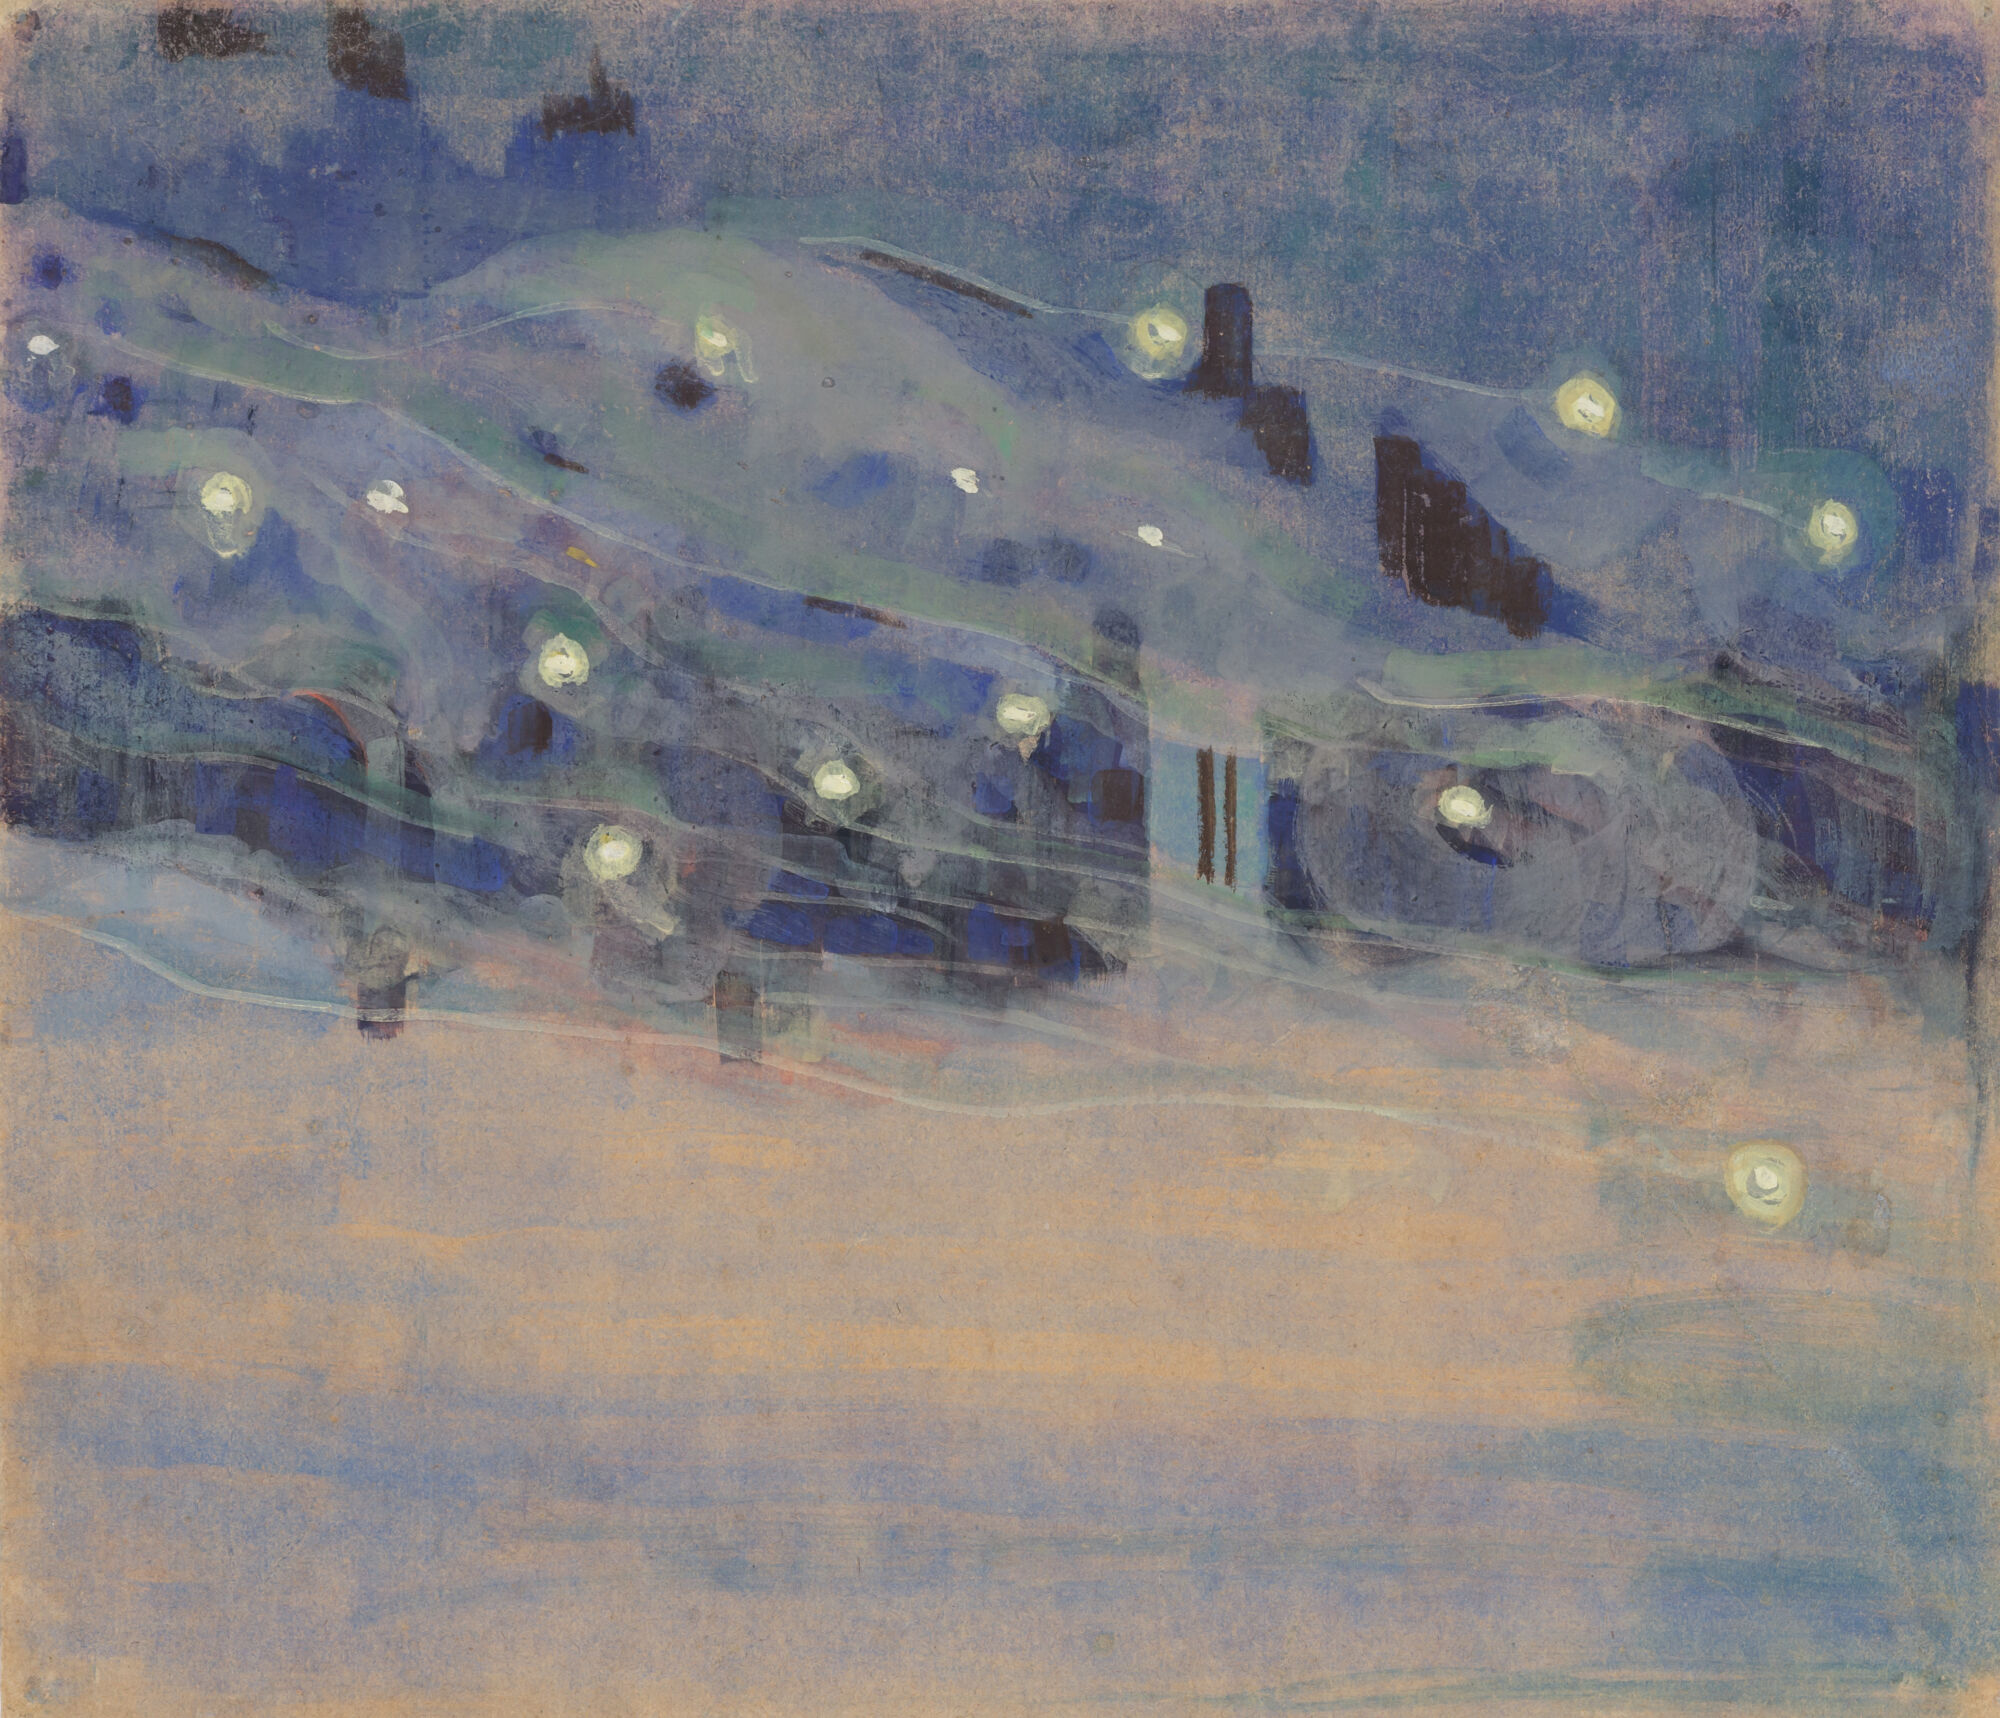 The Wick - M.K. Čiurlionis, Sparks, III from the cycle of 3 paintings, 1906. Tempera on paper, 31.3 x 36.2 cm. Courtesy M. K. Čiurlionis National Museum of Art.
